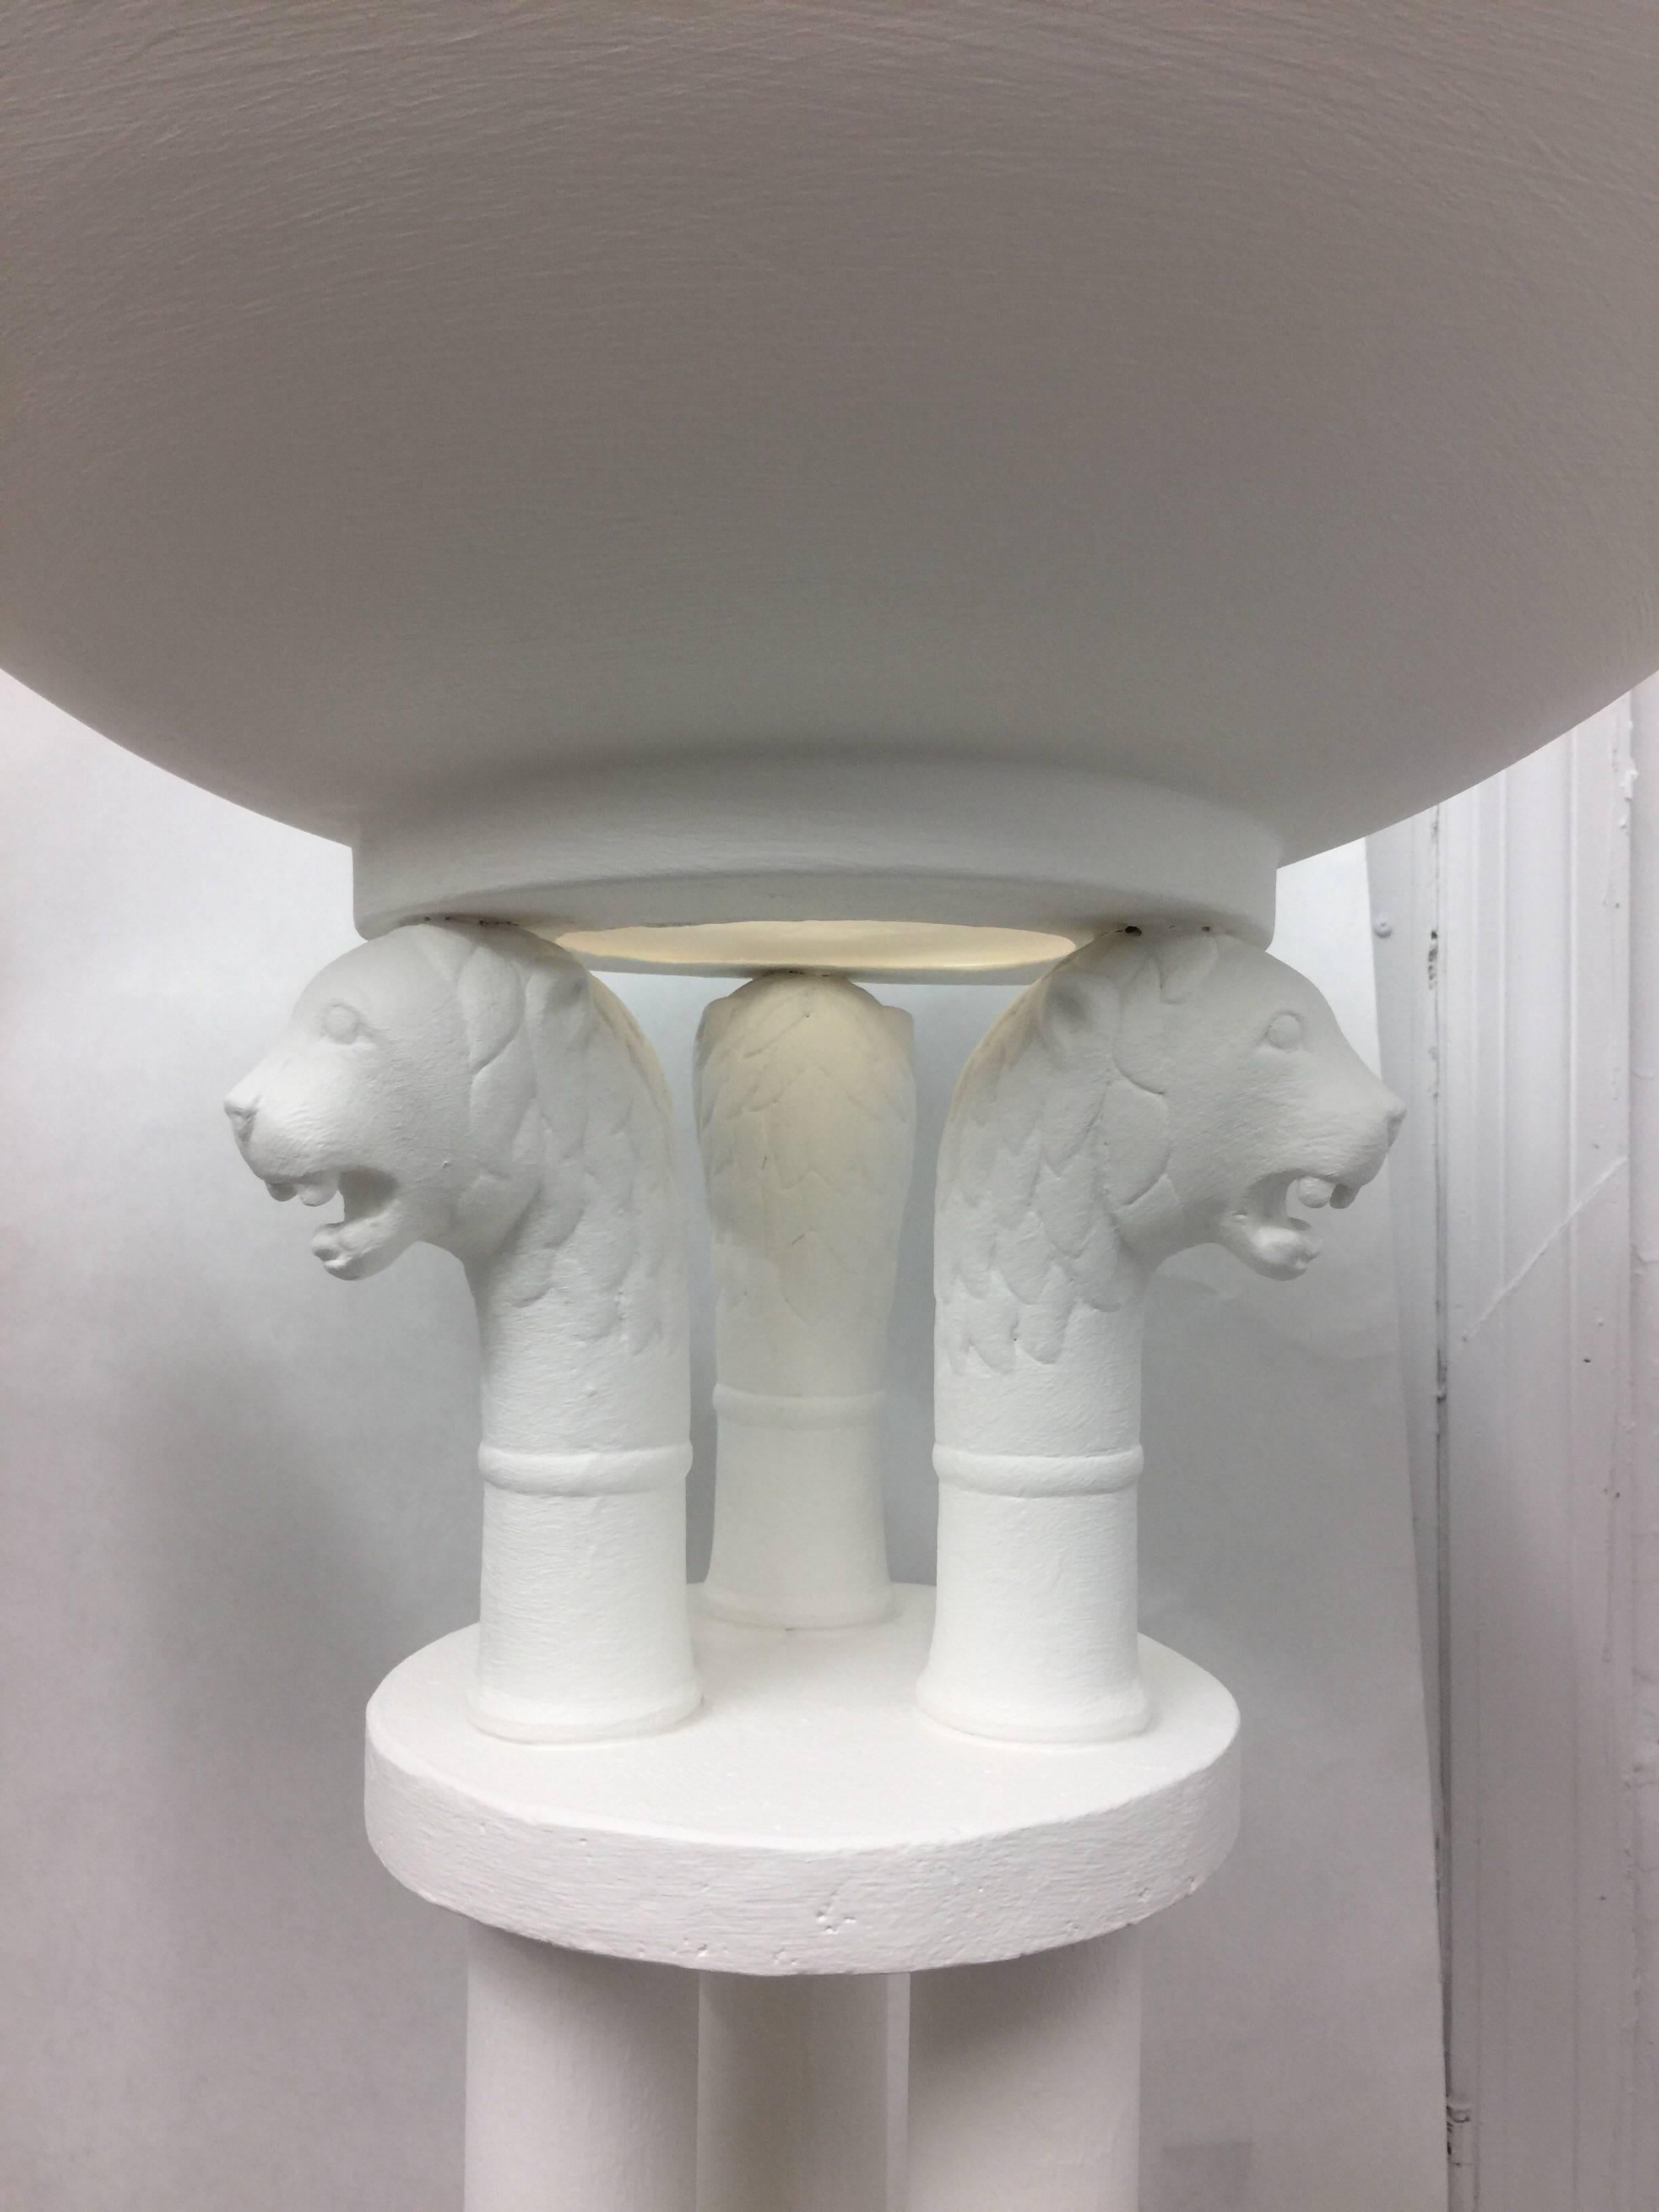 Topped with three Roman style lion heads and an oversized saucer diffuser for up-lighting, these matching pair of floor lamps are finished in a soft plaster tone. Whimsical and very much in the manner of John Dickinson.